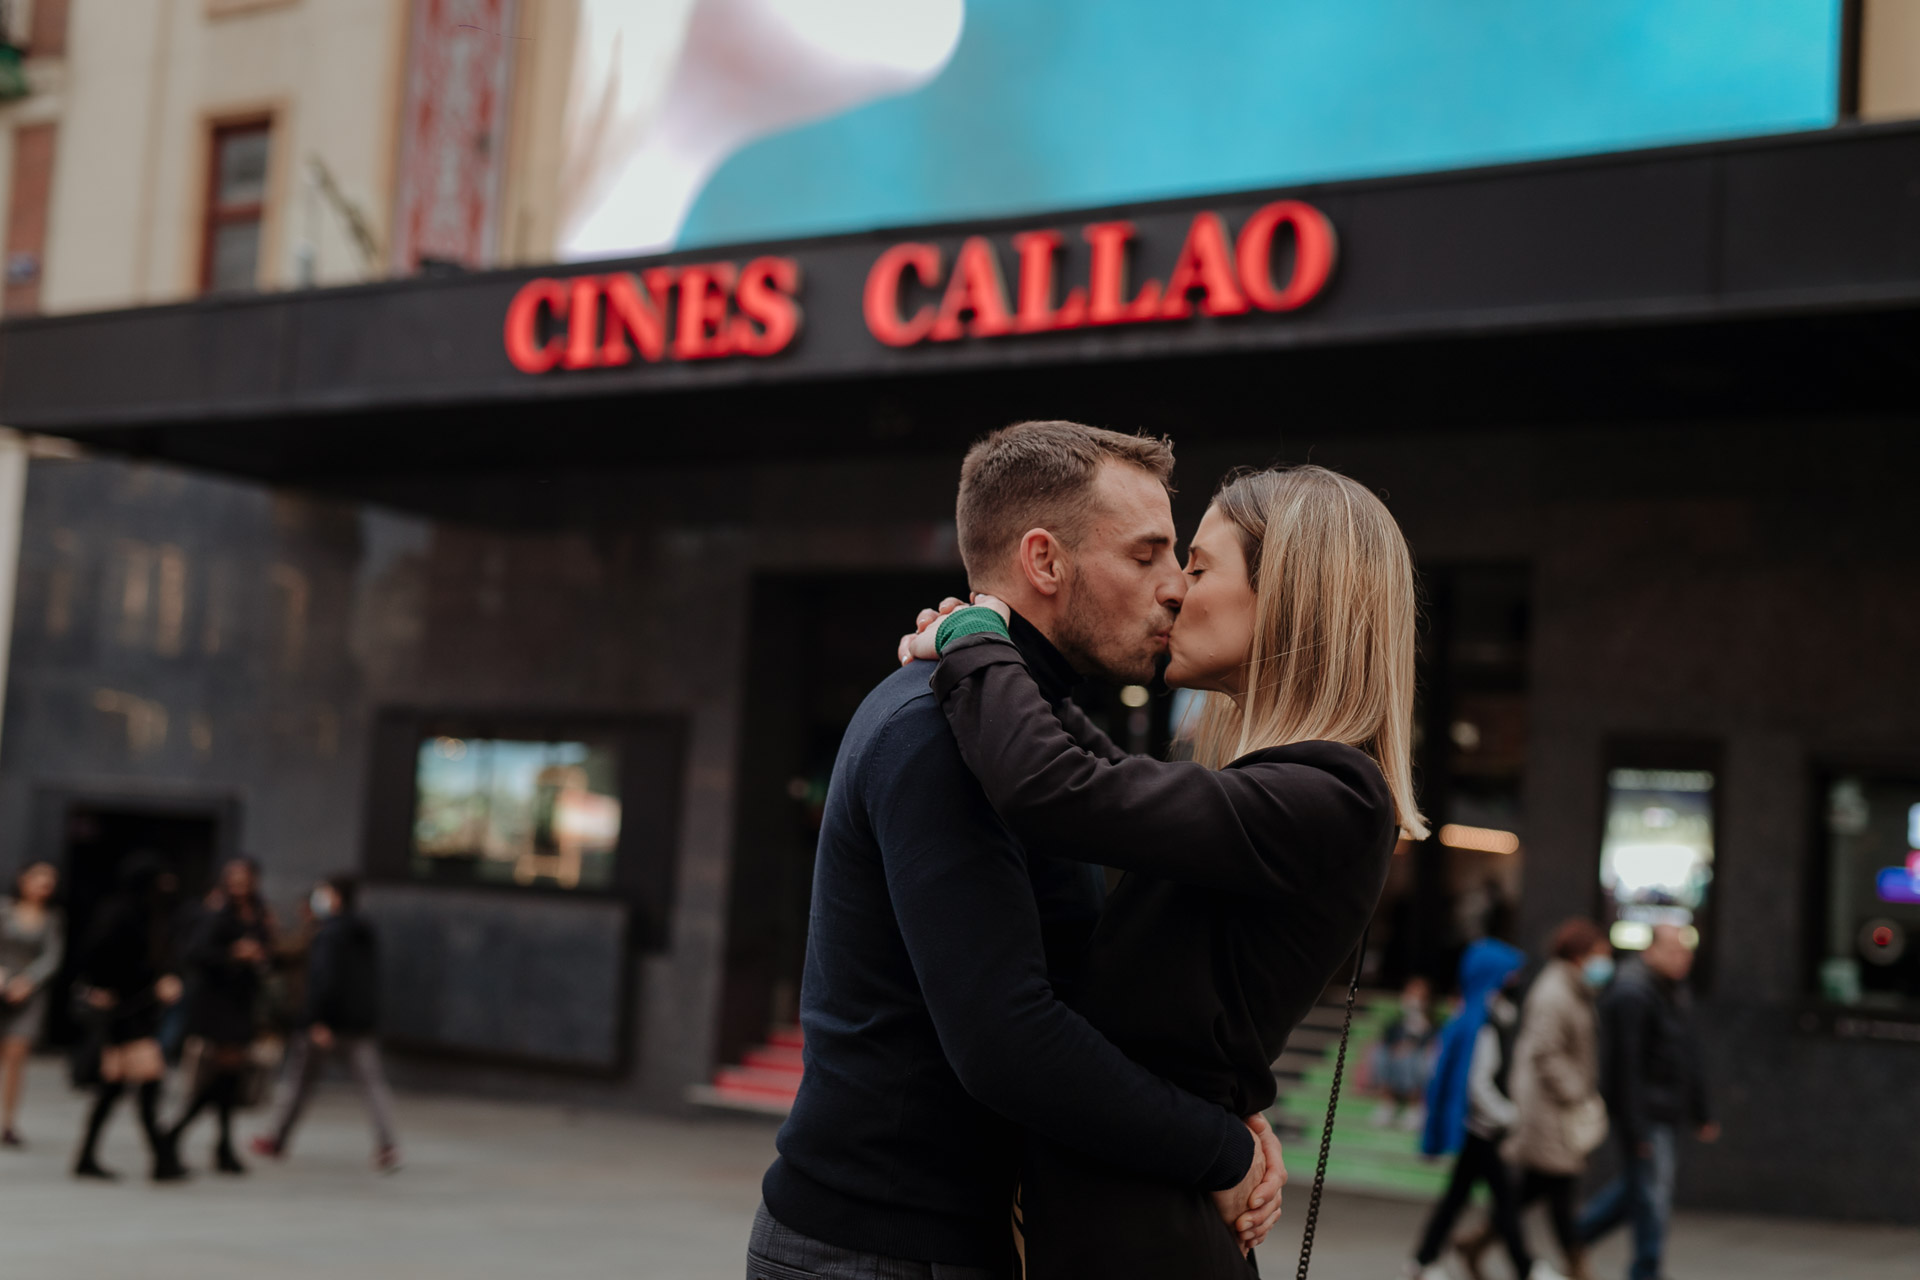 cines callao and gran via engagement photoshoot in madrid